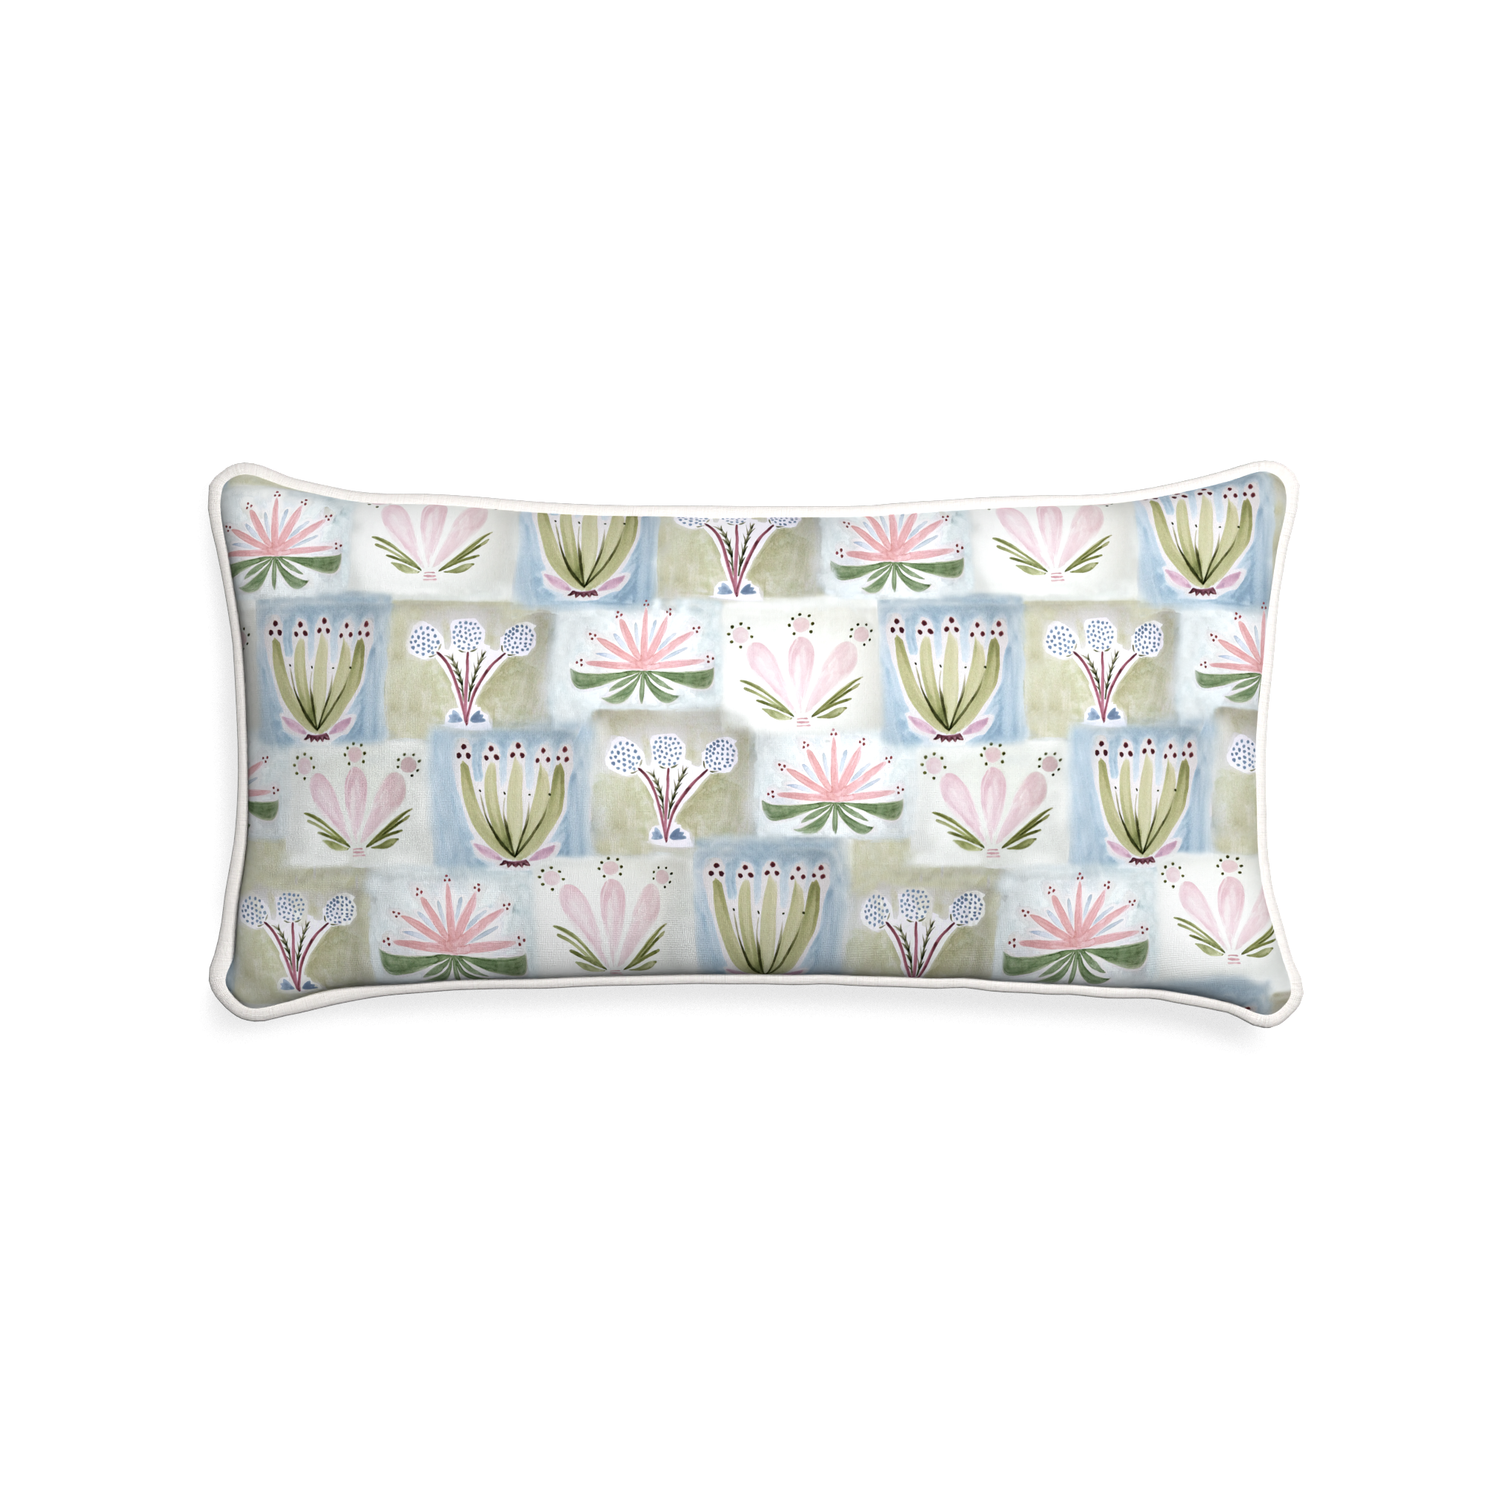 Midi-lumbar harper custom hand-painted floralpillow with snow piping on white background